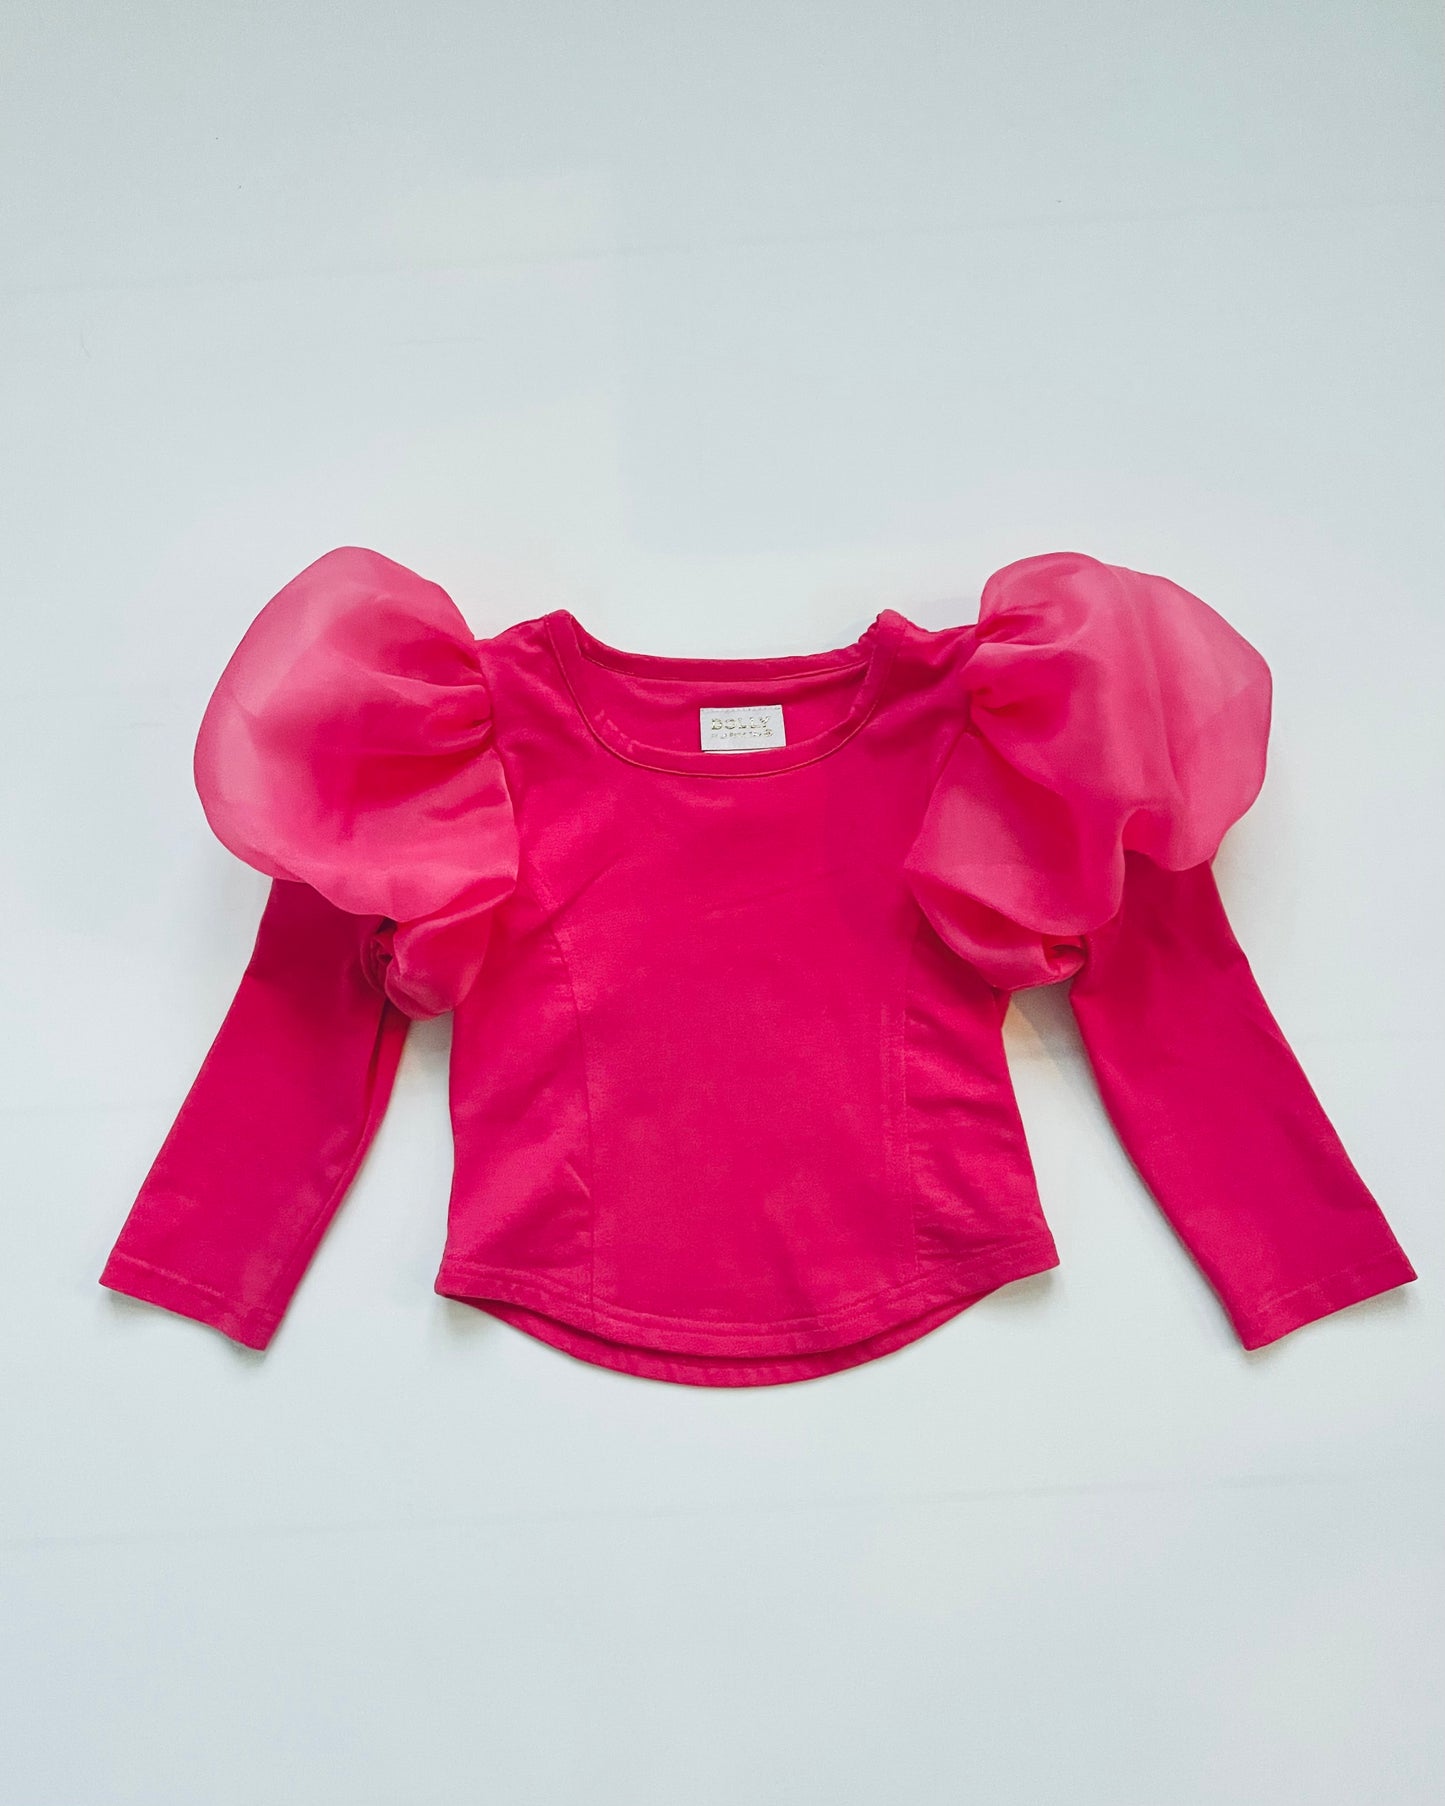 DOLLY WORLD PUFF LONG SLEEVE ORGANZA TOP WITH COTTON BODY barbiepink